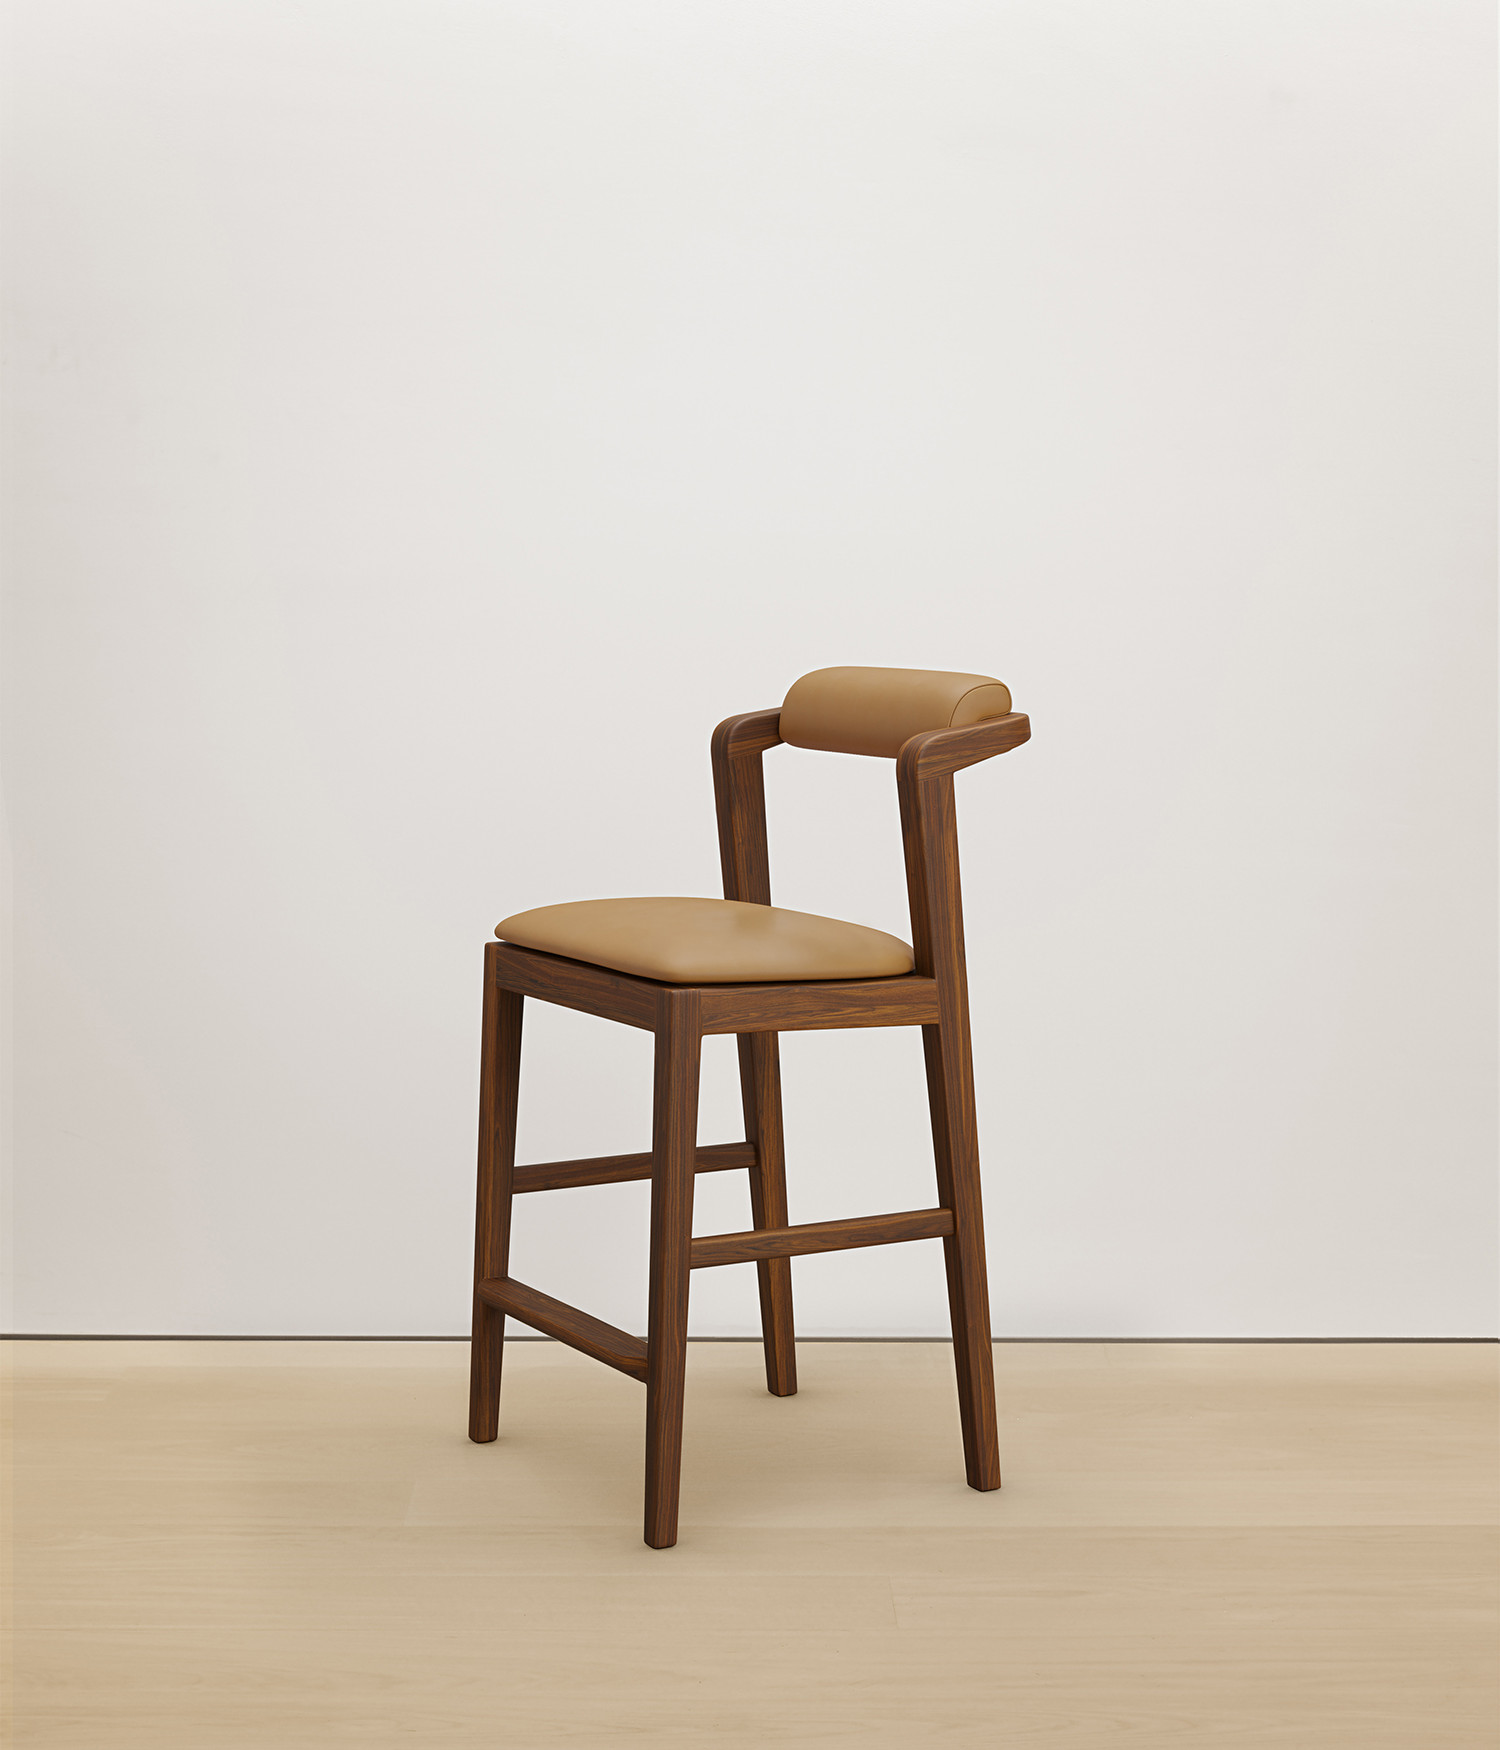  walnut stool with tan color upholstered seat